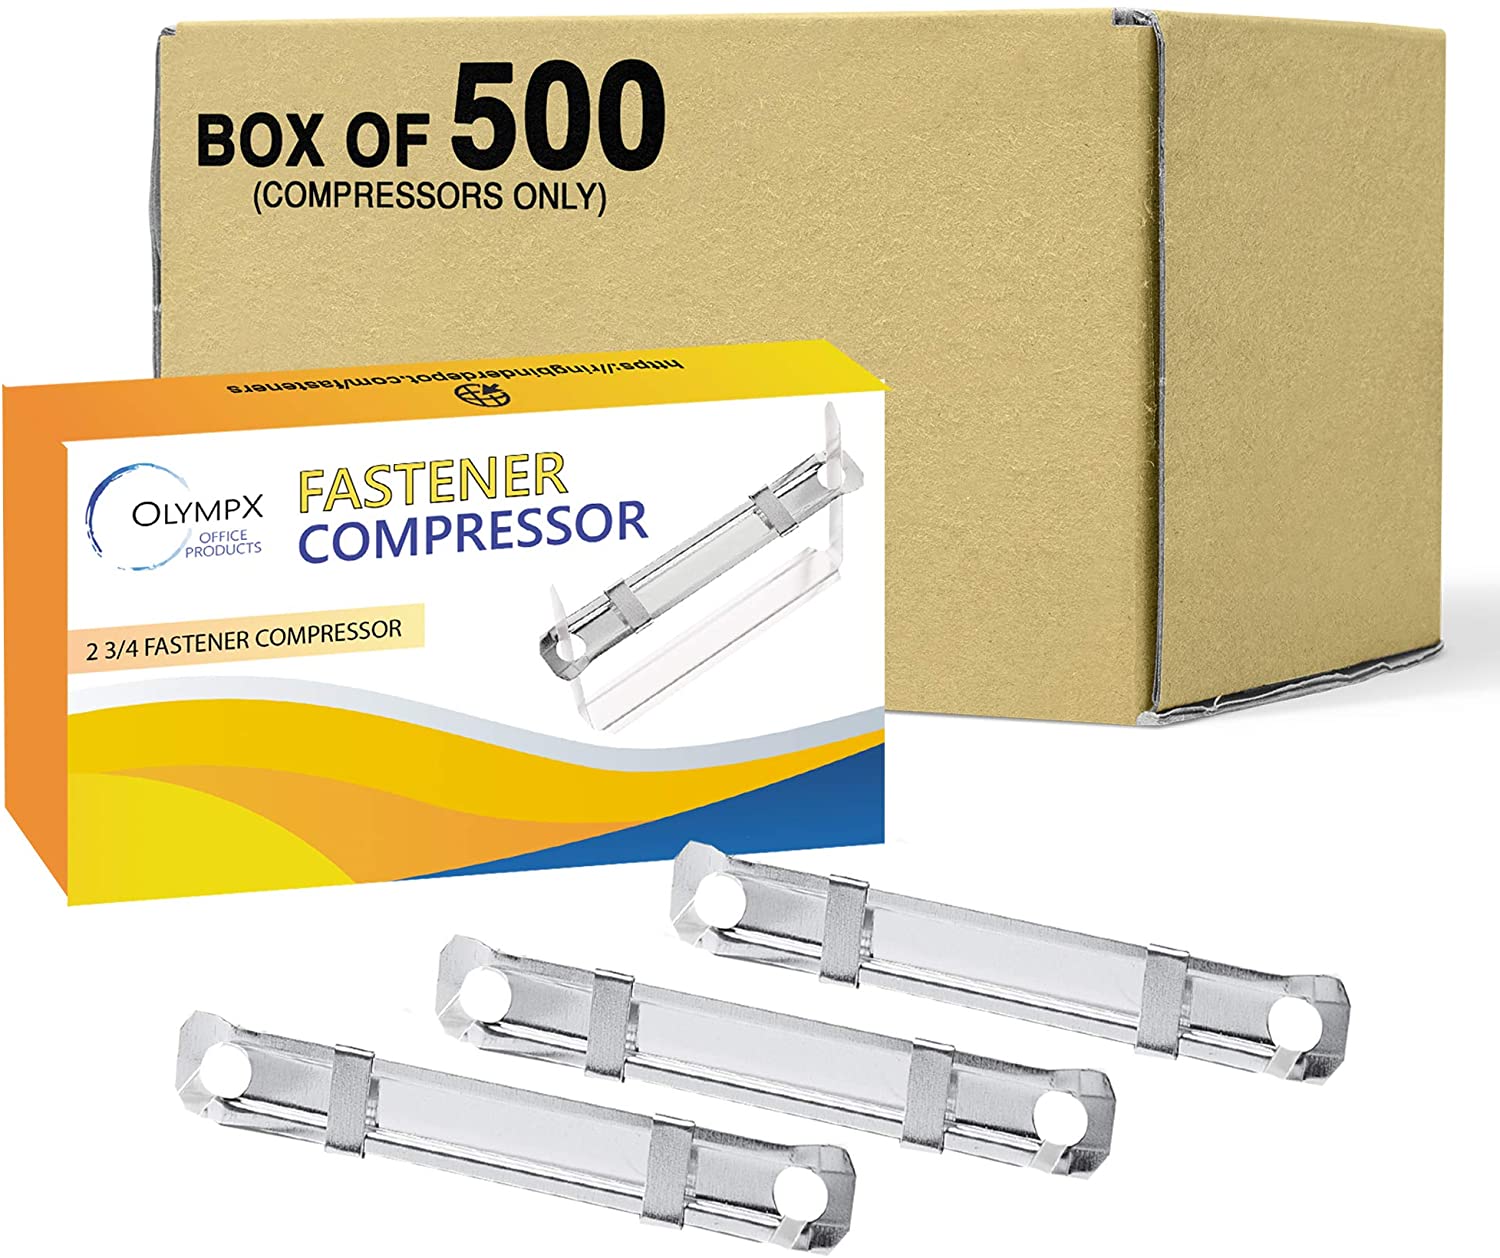 Prong Paper Fastener Compressors for Standard 2-Hole Punch, Works with 1 Inch - 3.5 Inch Capacity Box of 500 (Compressors Only)